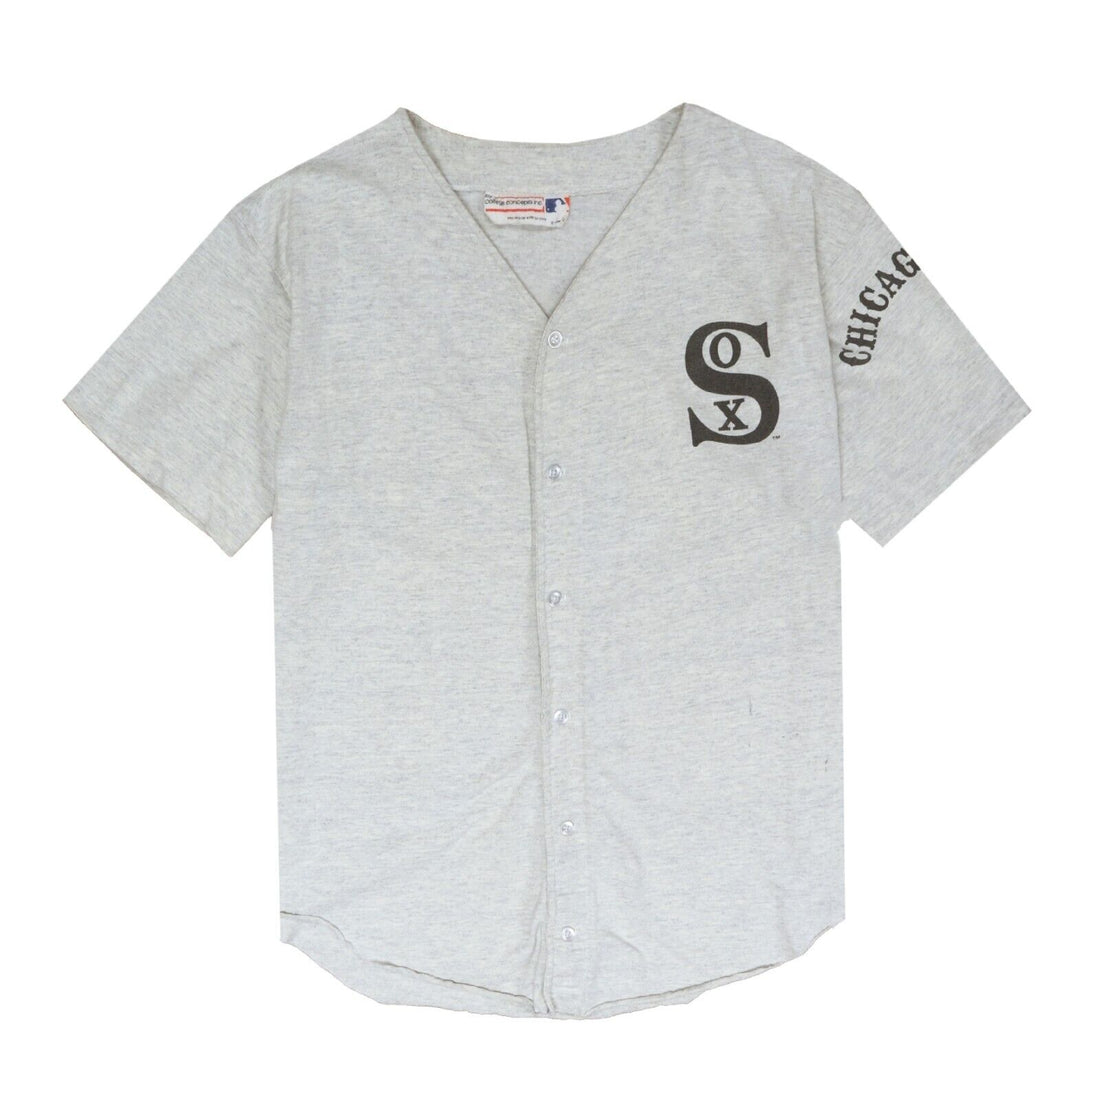 Vintage Chicago White Sox Cooperstown Collection Baseball Jersey